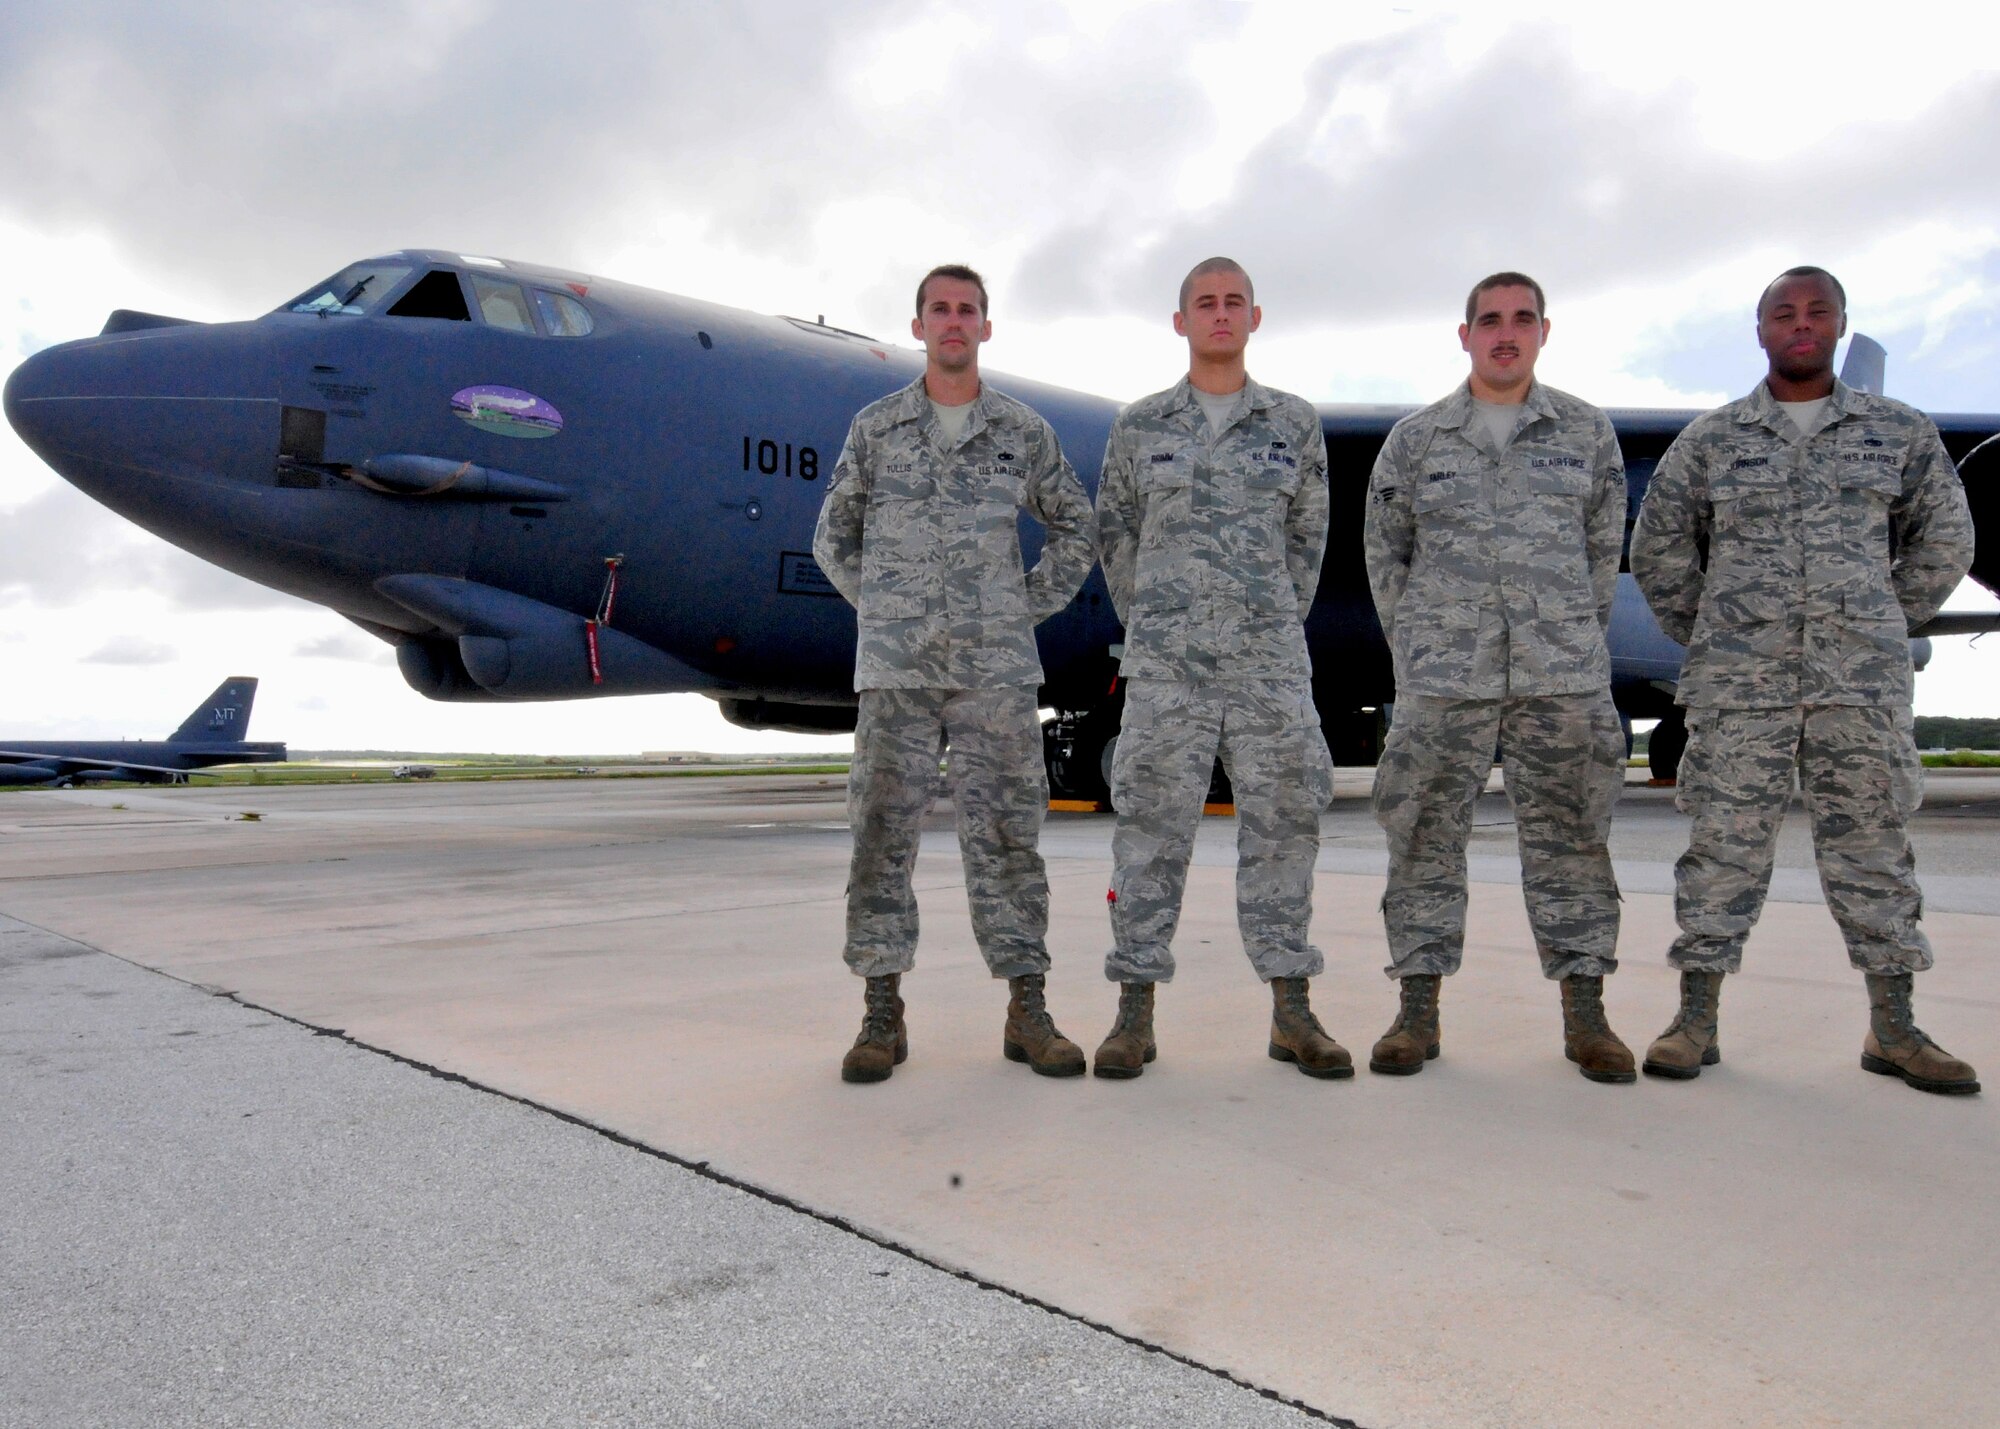 ANDERSEN AIR FORCE BASE, Guam  -- "Nine-O-Nine" award winners Staff Sgt. Nicholas Tullis, Airman 1st Class Bruce Brimm, Senior Airman Cody Farley and Staff Sgt. Oliver Johnson, 36th Expeditionary Aircraft Maintenance Squadron crew chiefs, stand in front of B-52 Stratofortress A1018 on the flightline here, July 24. Under the aircrew’s care, B-52 A1018 accomplished 20 consecutive sorties without a maintenance abort. (U.S. Air Force photo by Senior Airman Benjamin Wiseman/Released)